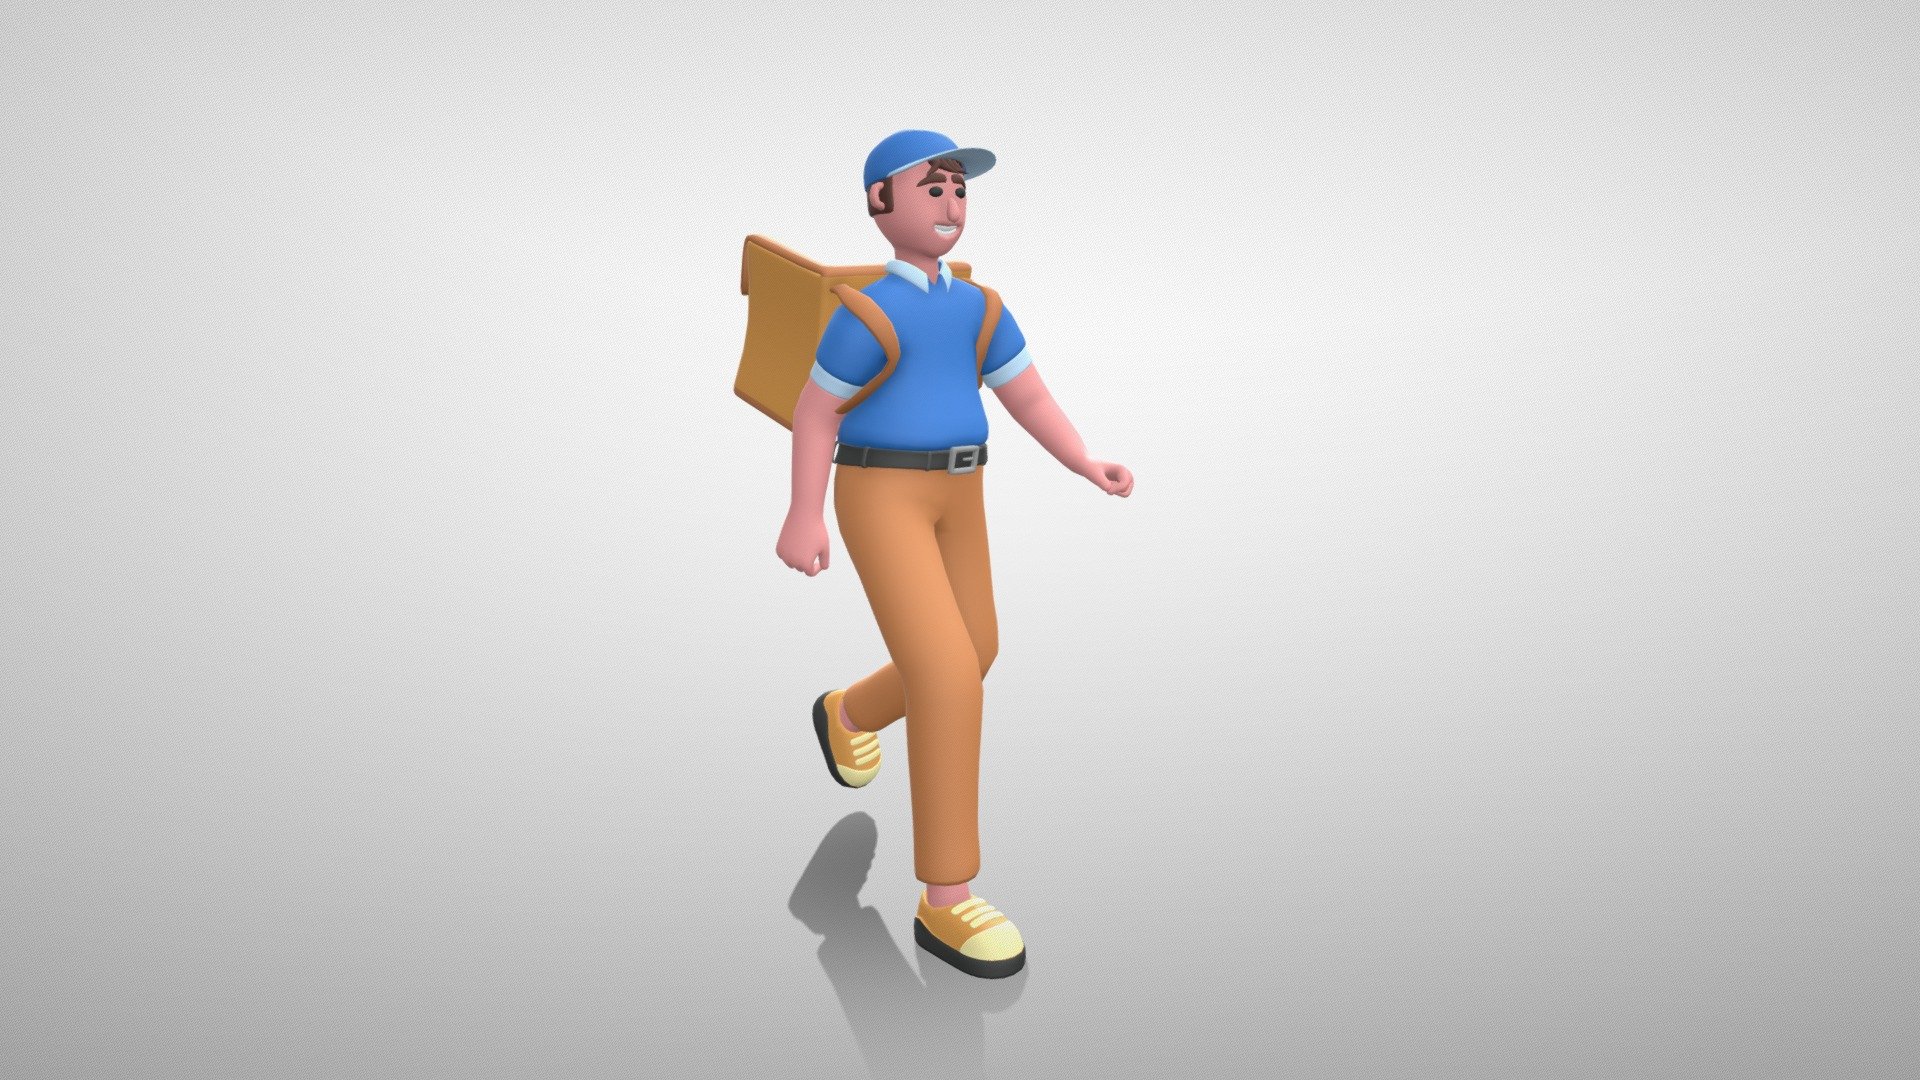 Stylized Man Courier is the part of the big characters bundle. These stylized 3D characters might be useful for motion graphics design, cartoon production, game development, illustrations and many other industries.

The 3D model is rigged and ready to use with Mixamo. You can apply any Mixamo animation in one click . We also added 12 widely used animations.

The character model is well optimized and subdivision ready. You can choose any smoothing option you want, according to your project.

The model has only a single texture. It is useful for mobile game development and it's easy to change colors of clothes, skin etc.

If you have any questions or suggestions on improving our product, feel free to send a message to mail@dreamlab.net.ua - Stylized Man Courier - Mixamo Rigged Character - Buy Royalty Free 3D model by Dream Lab (@dreamlabanim) 3d model